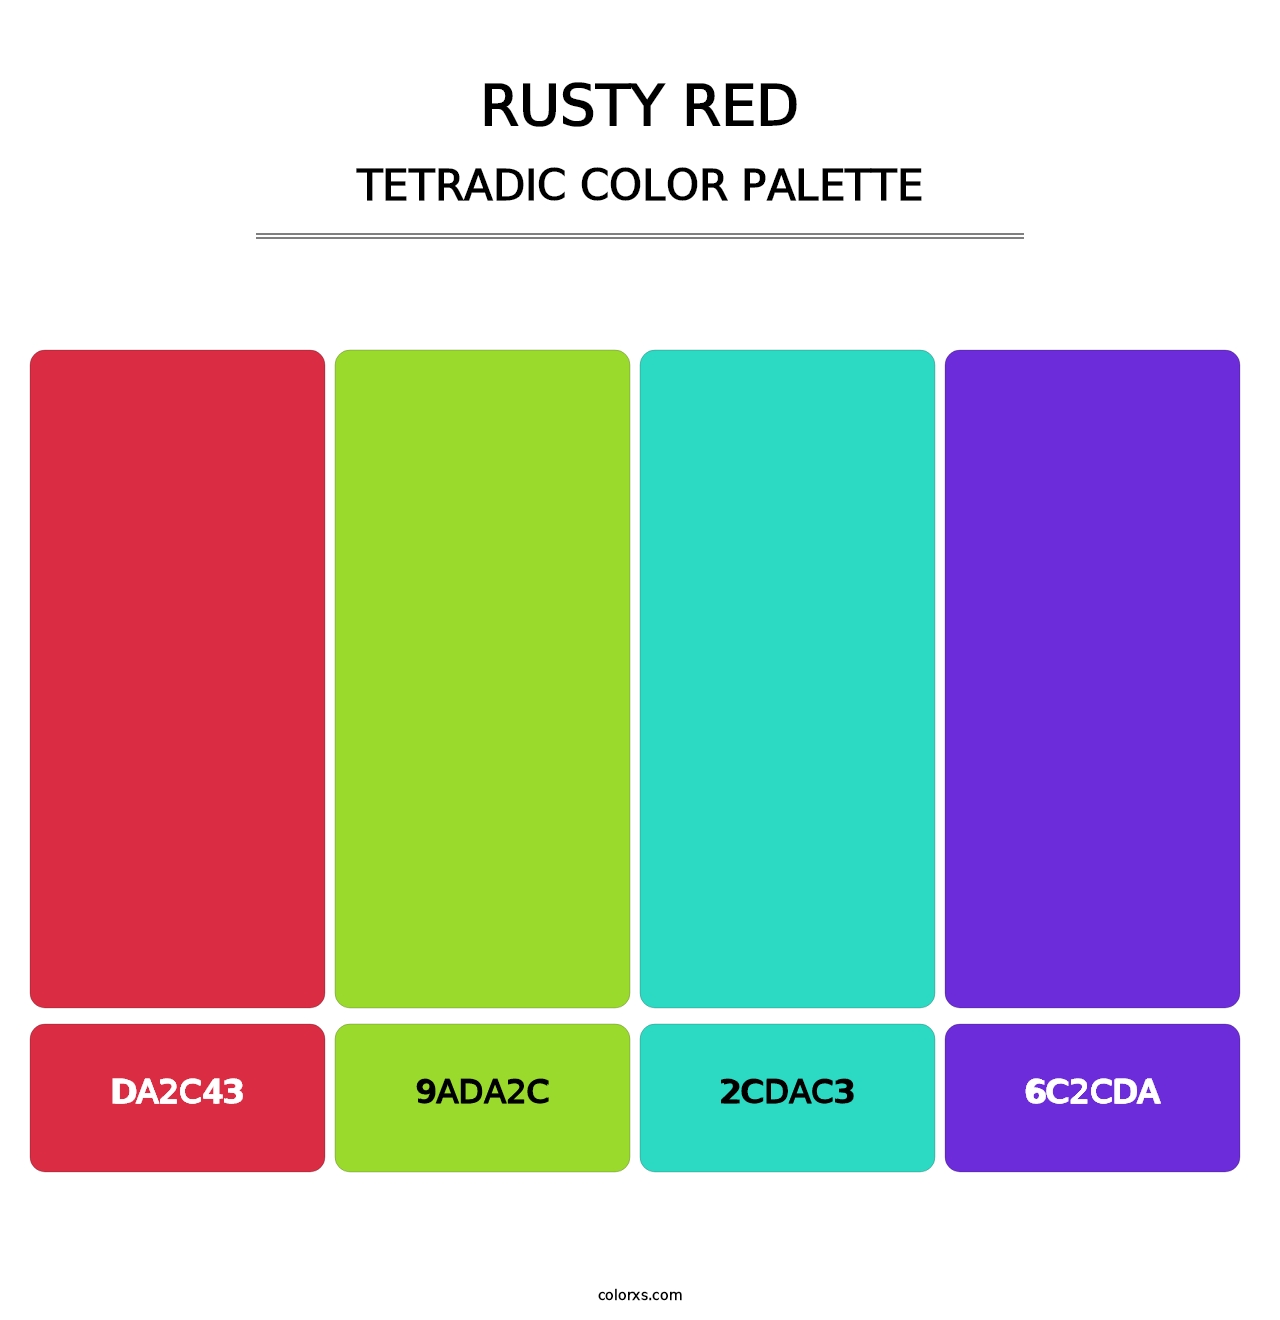 Rusty Red - Tetradic Color Palette